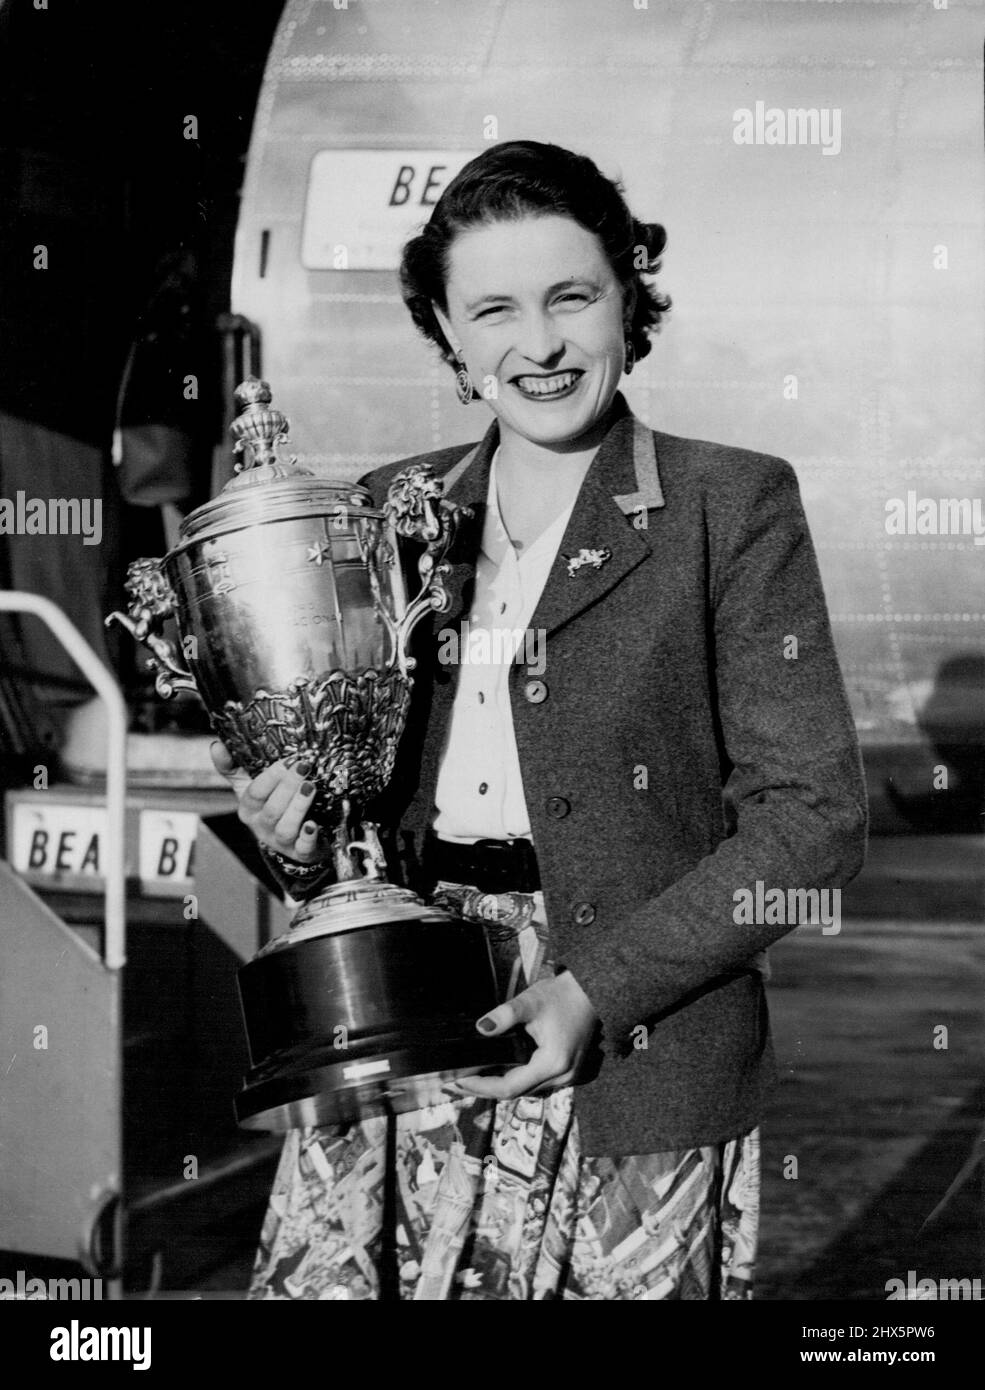 Another For Pat's Collection -- Clutching a massive cup she won at the International Horse show in Madrid, Miss Pat Smythe, Britain's leading horsewoman, is pictured at London Airport to-night (Monday) on her arrival from Paris by Bea Liner. Yesterday, Miss Smythe won the Prix de la Federation de Sports Equestres in the International Horse show at Vichy. July 05, 1954. (Photo by Reuter Photo). Stock Photo